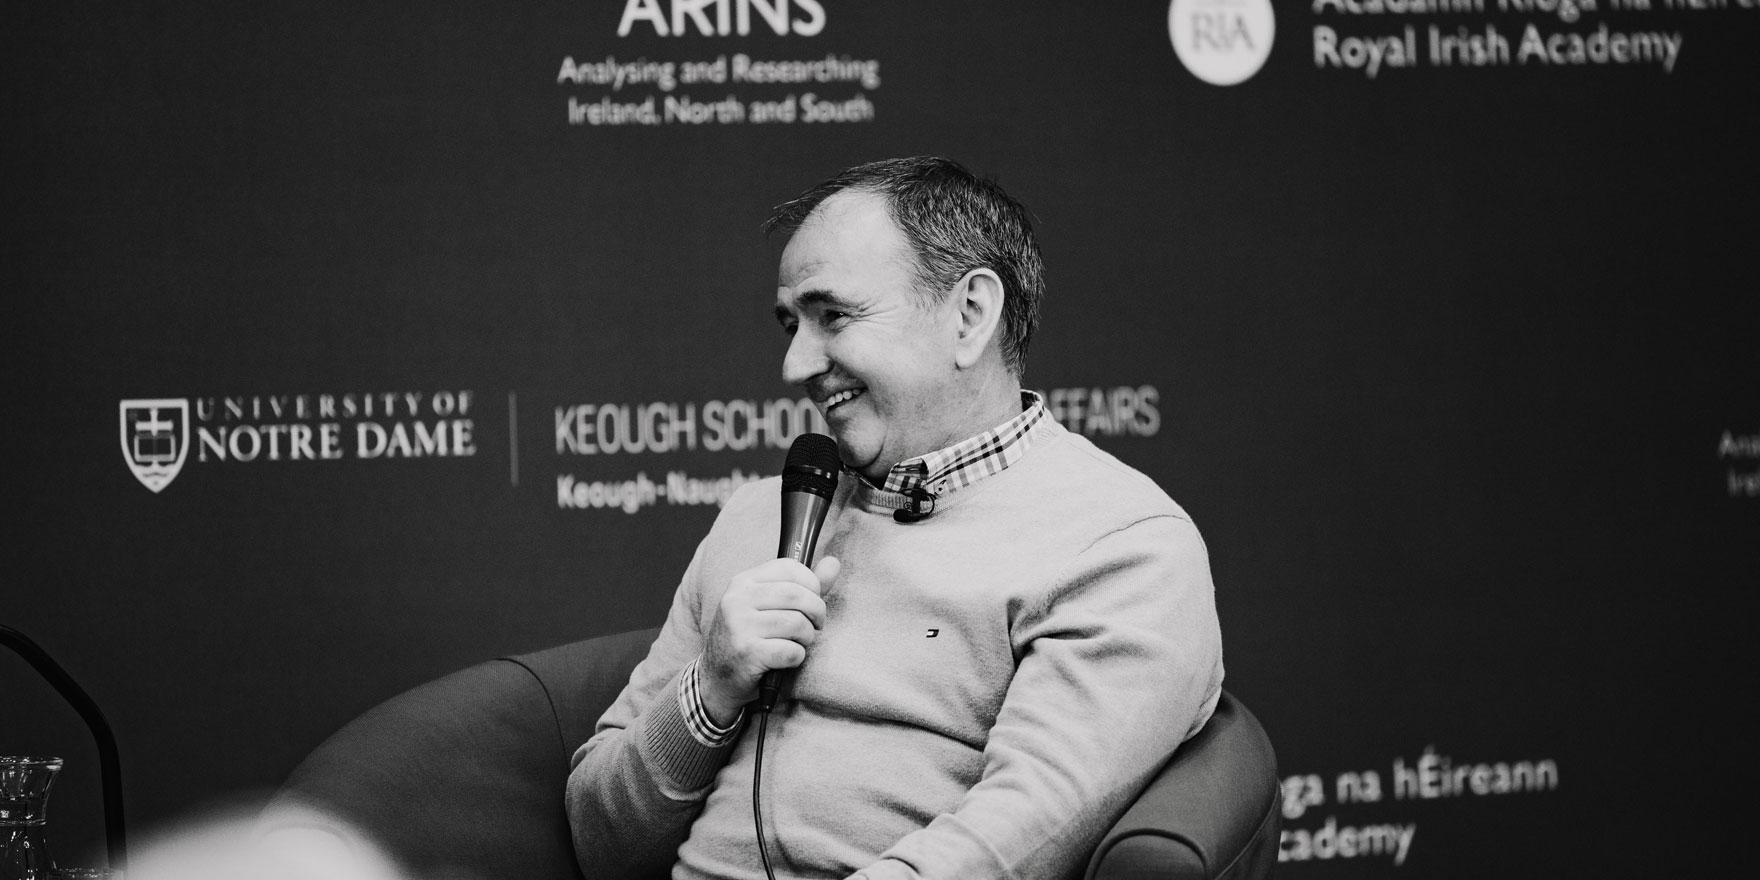 Black and white photo of Pat Fenlon sitting onstage at the ARINS event.